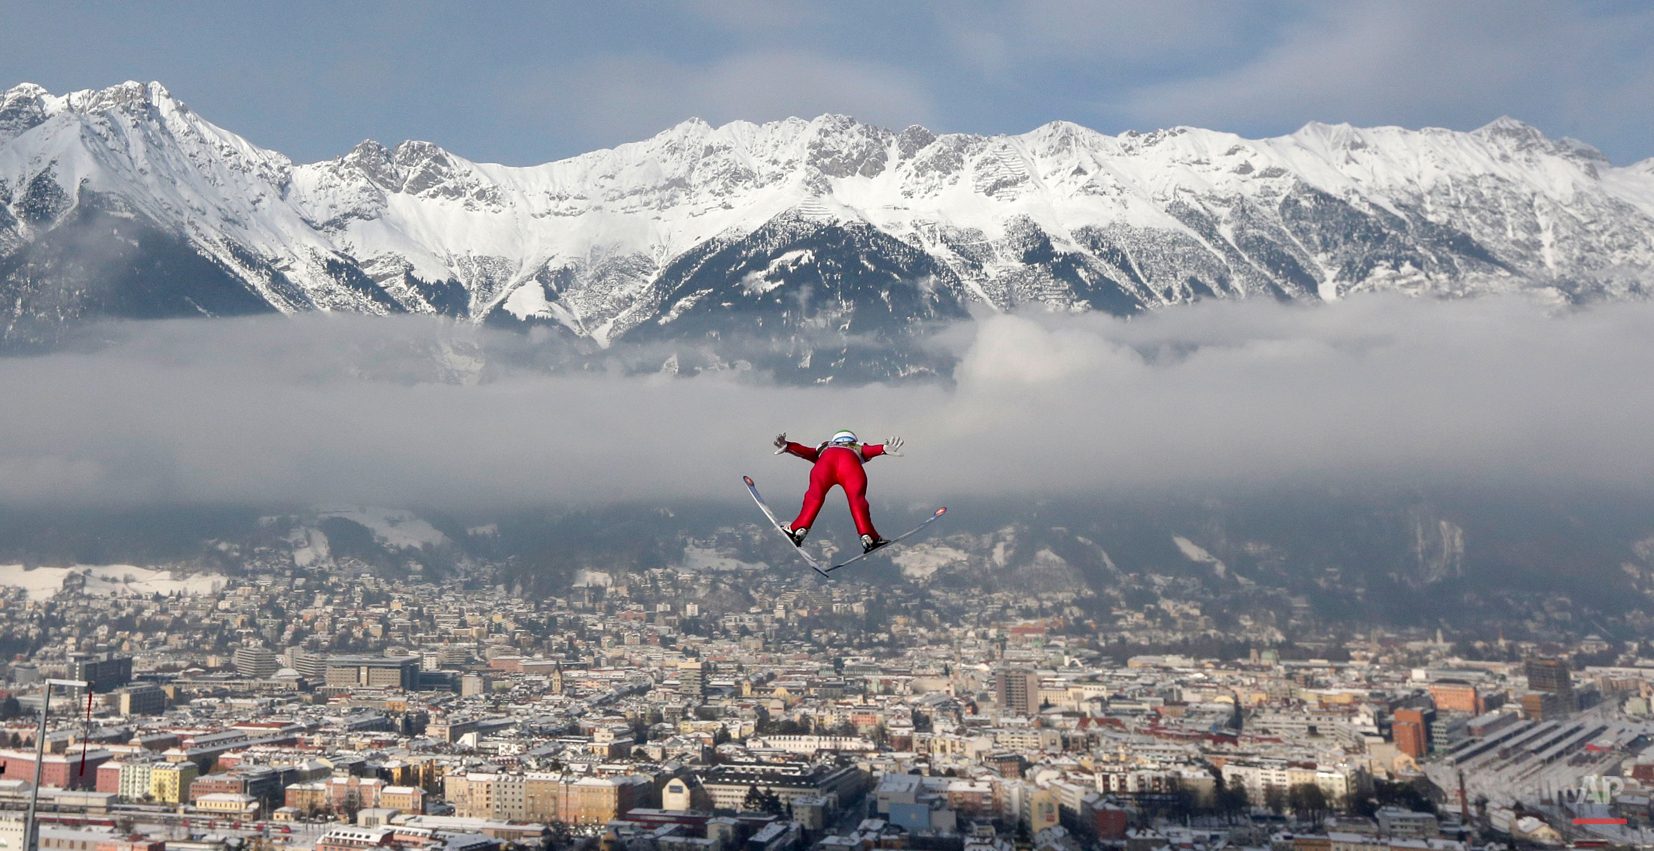  In this Jan. 3, 2015 photo, Norway's Anders Jacobsen soars during the trial jump at the third stage of the four hills ski jumping tournament in Innsbruck, Austria. (AP Photo/Matthias Schrader) 